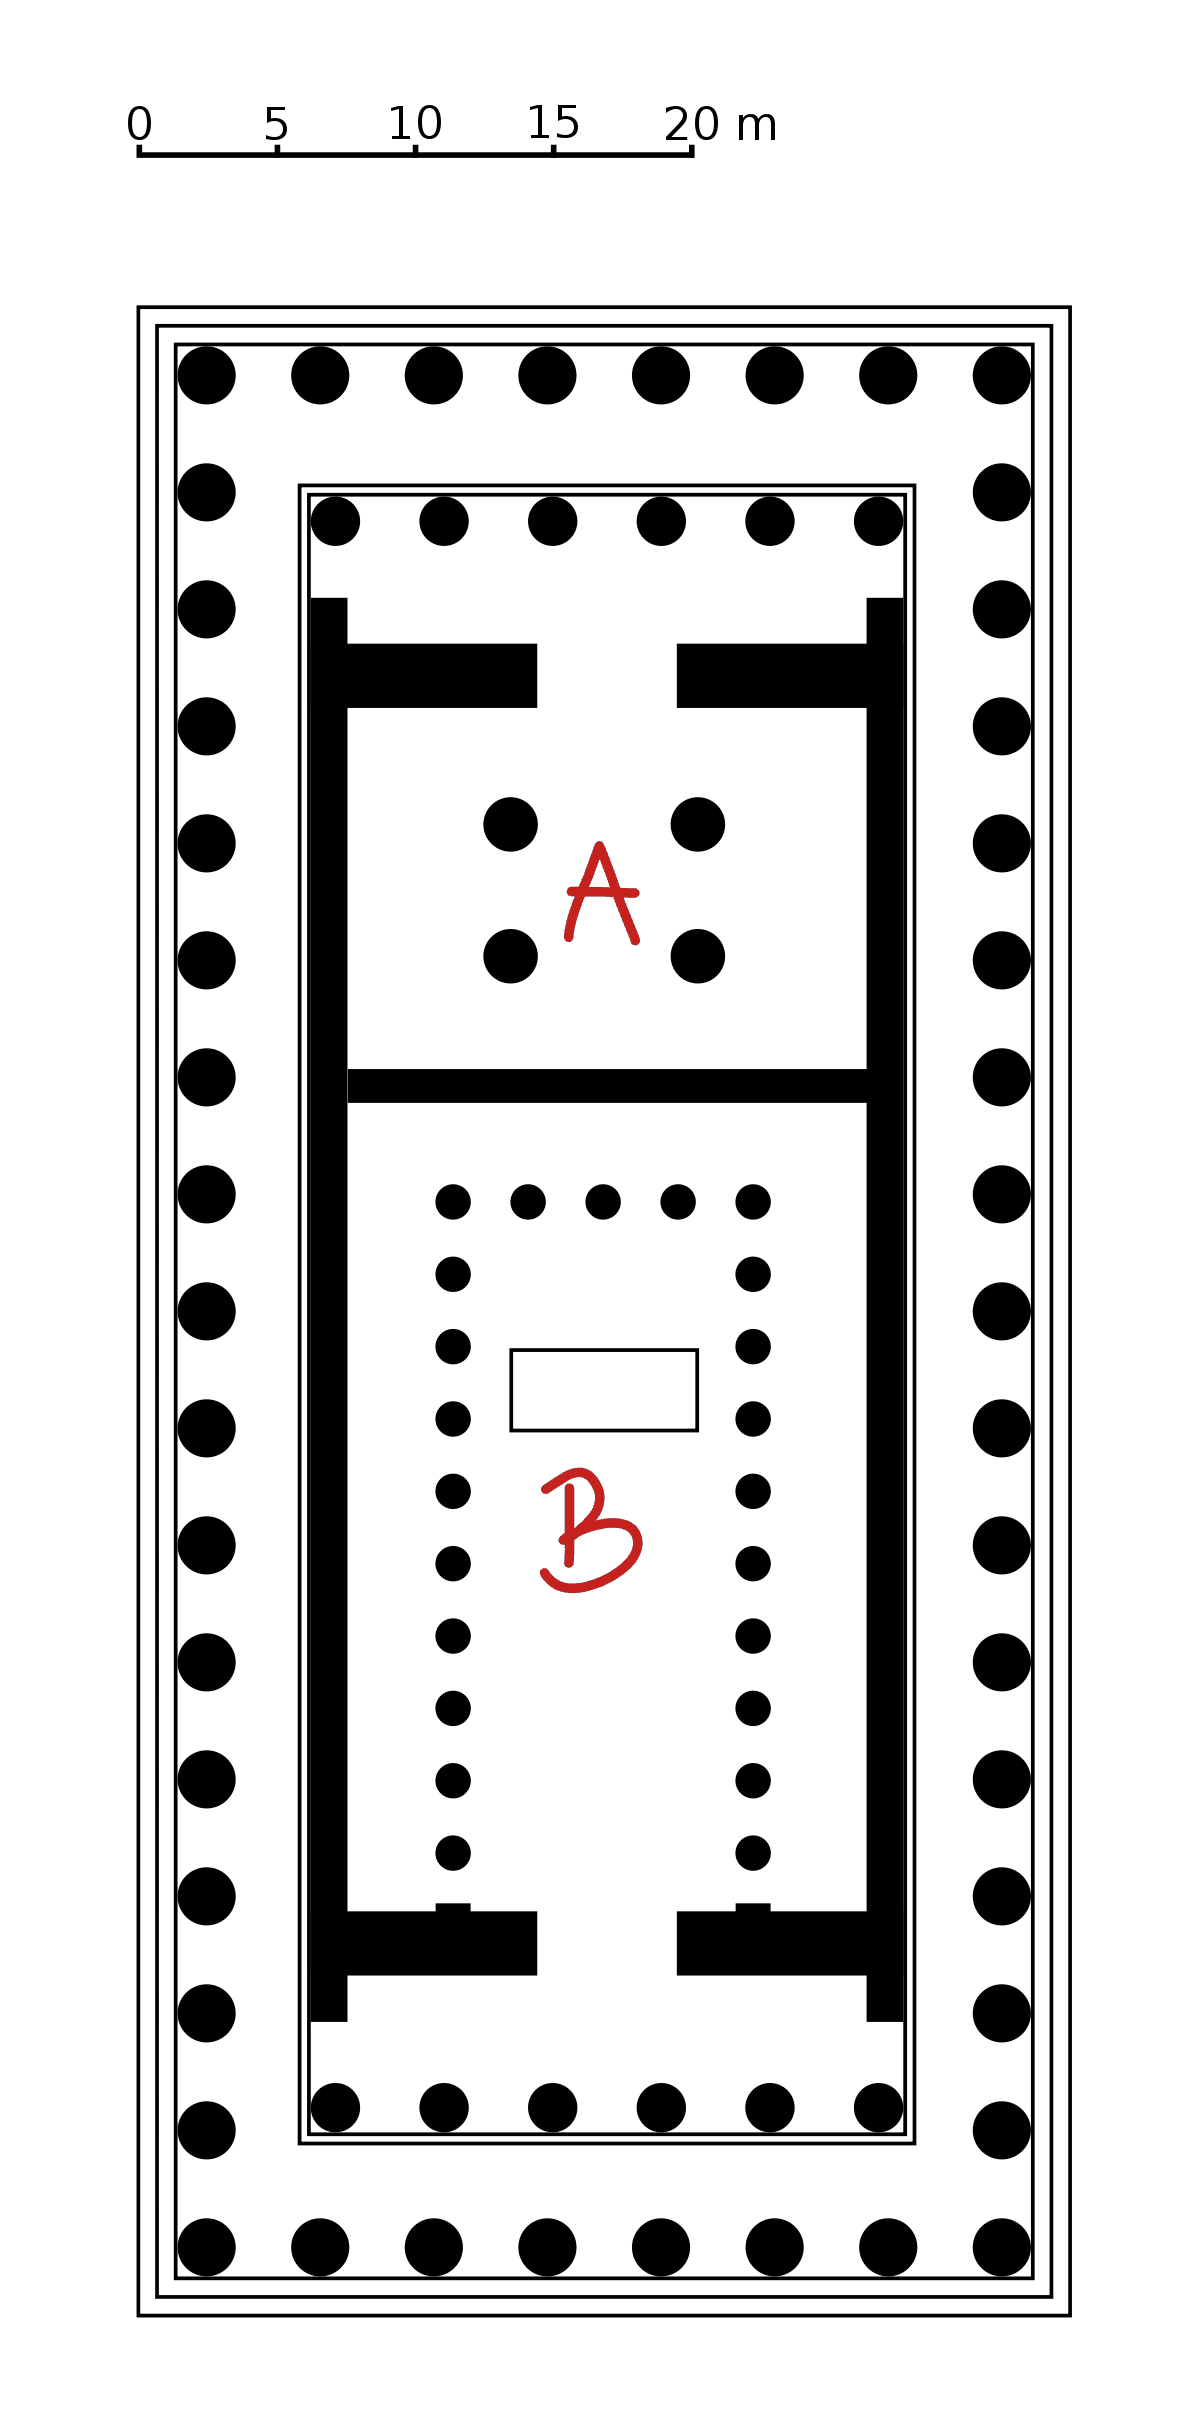 <p>Label parts A and B of the Parthenon.</p>